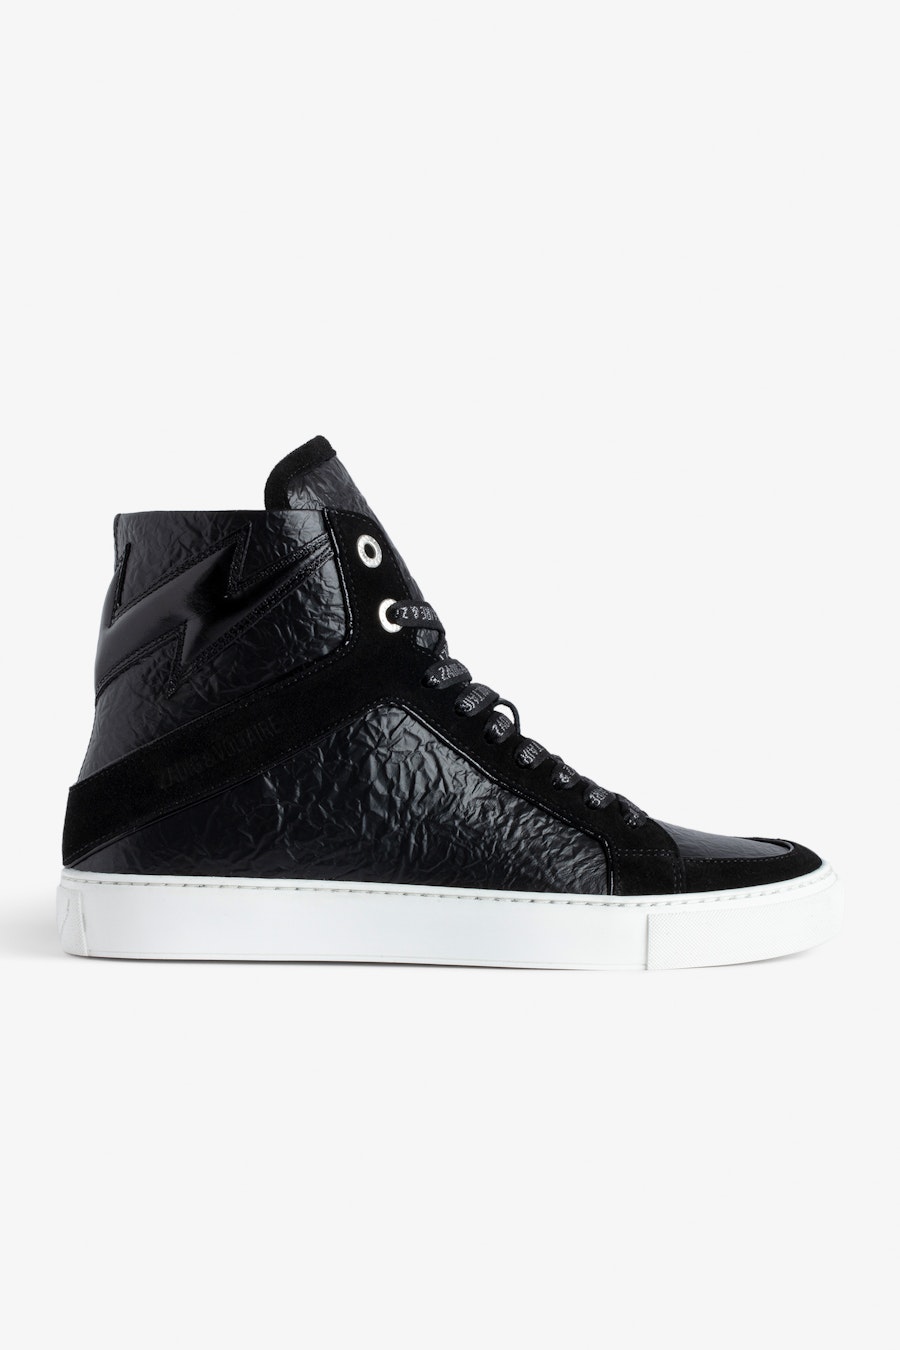 ZADIG&VOLTAIRE ZV1747 High Flash High-Top Crinkled Sneakers